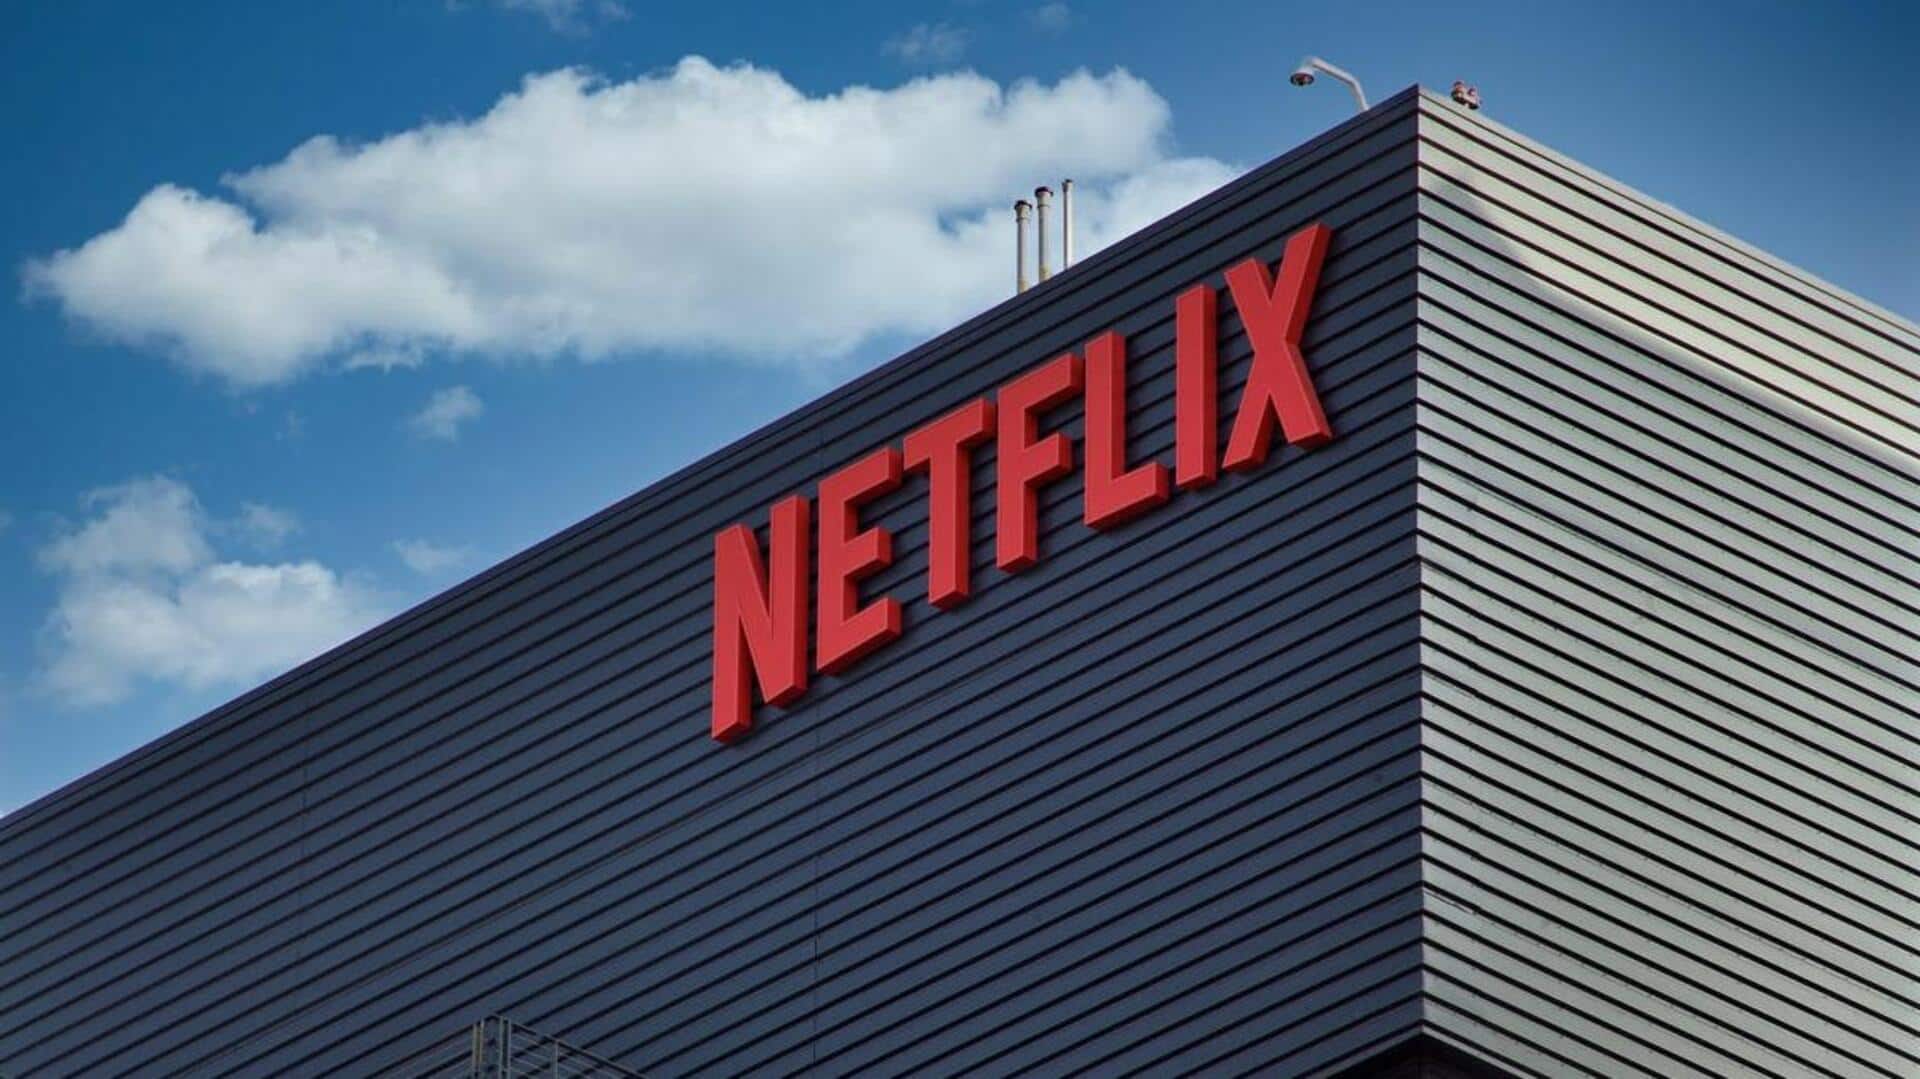 Netflix to launch brick-and-mortar retail stores in 2025